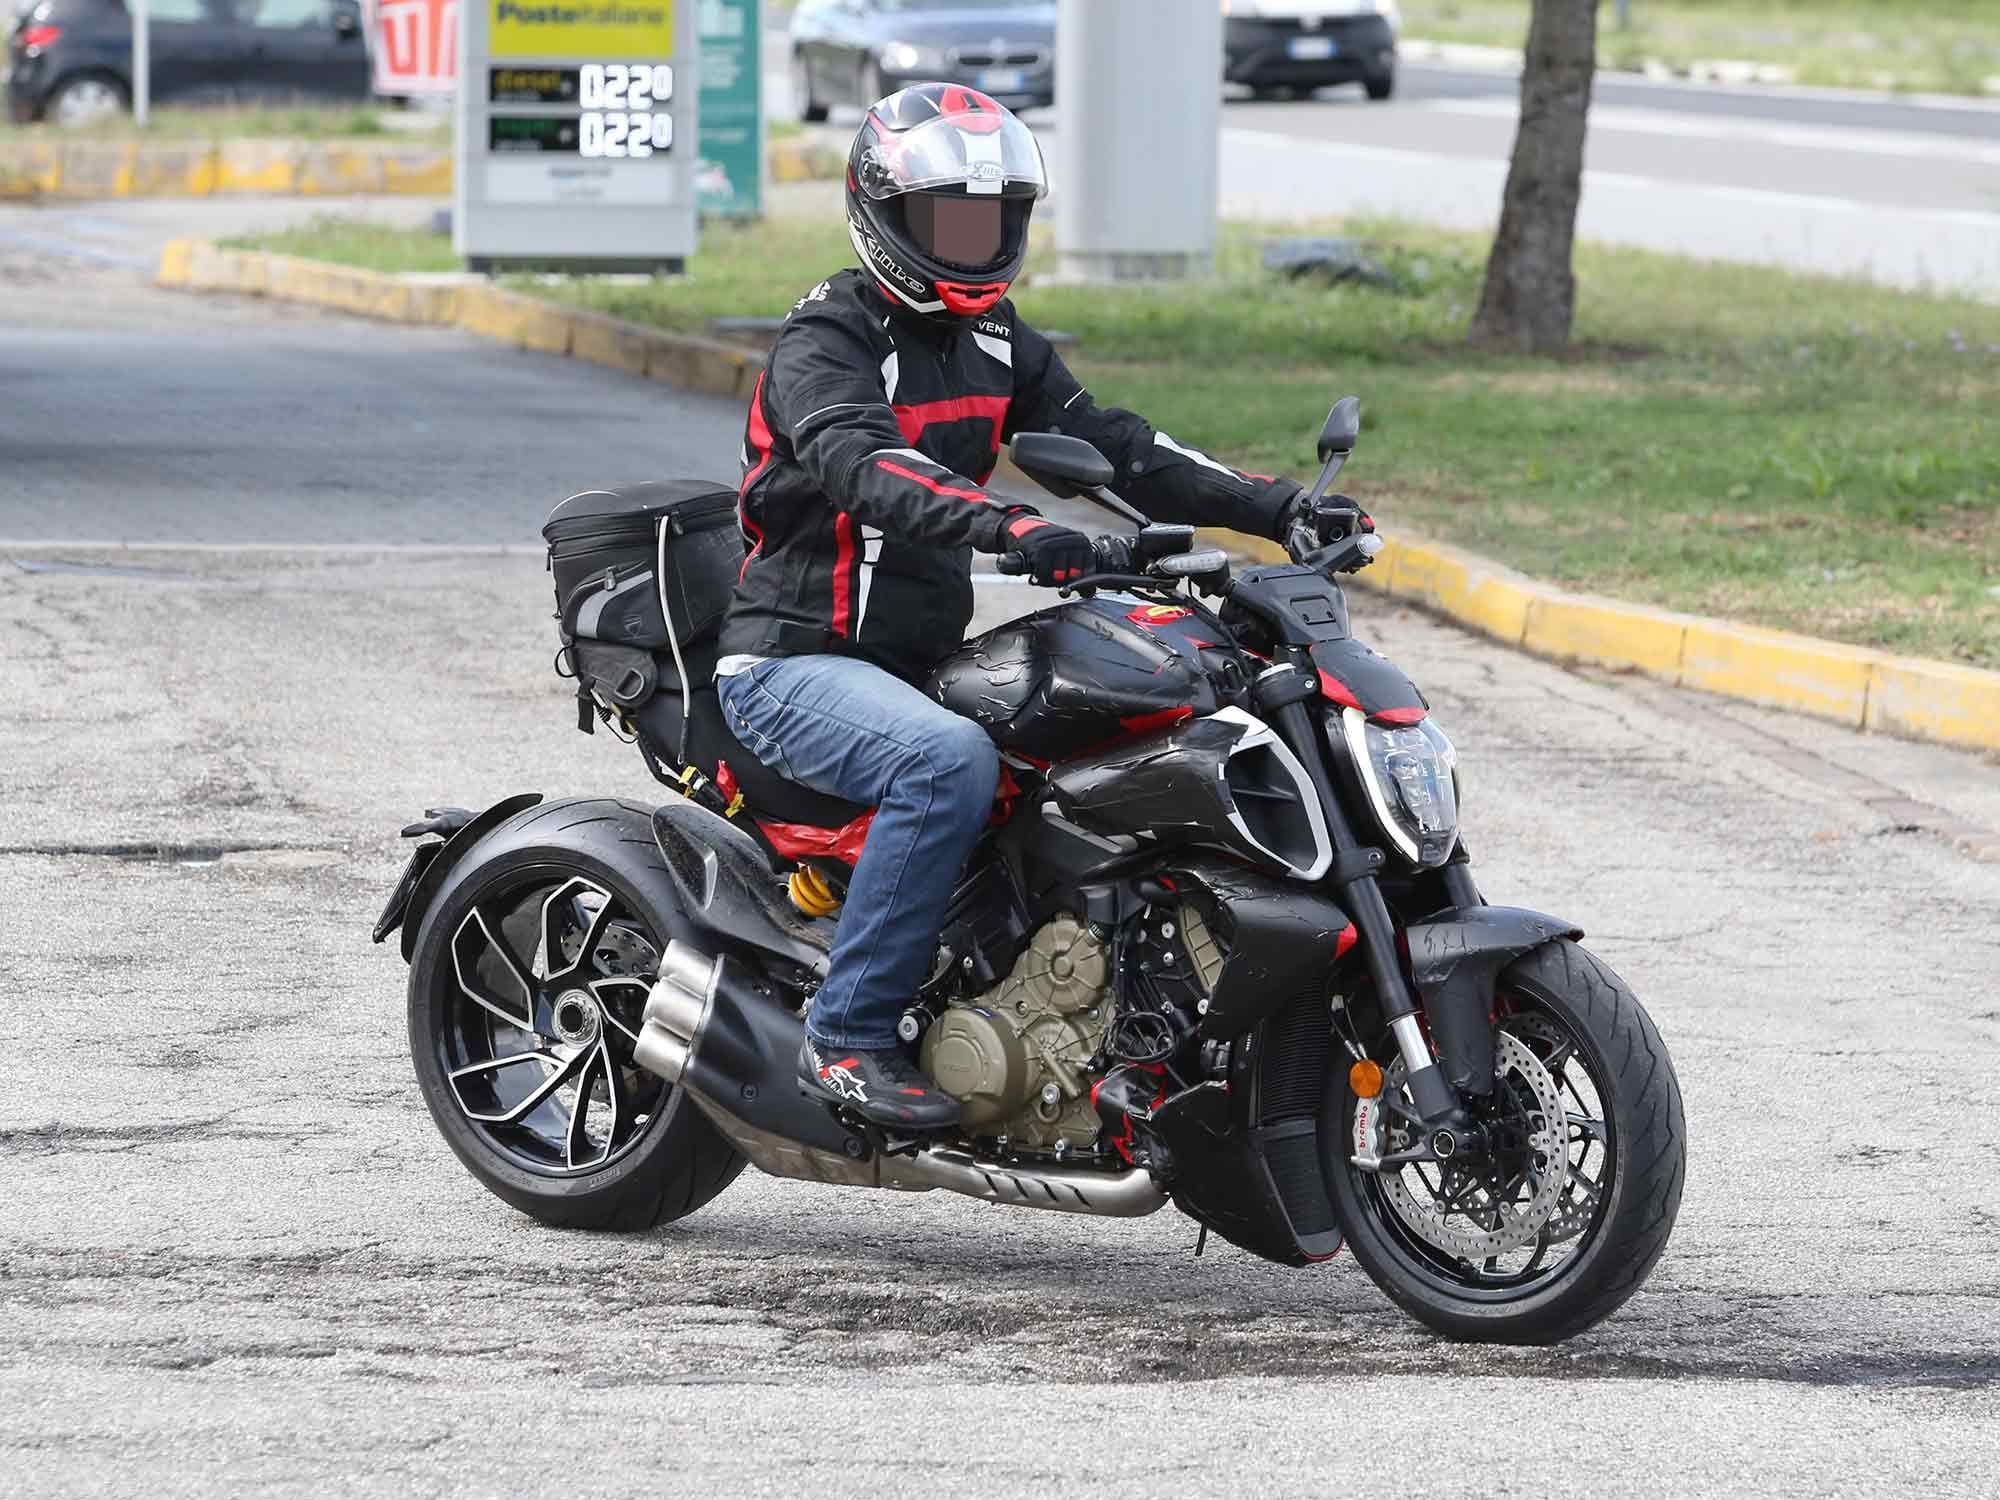 Clearly a Diavel, but also clearly powered by Ducati’s V-4.